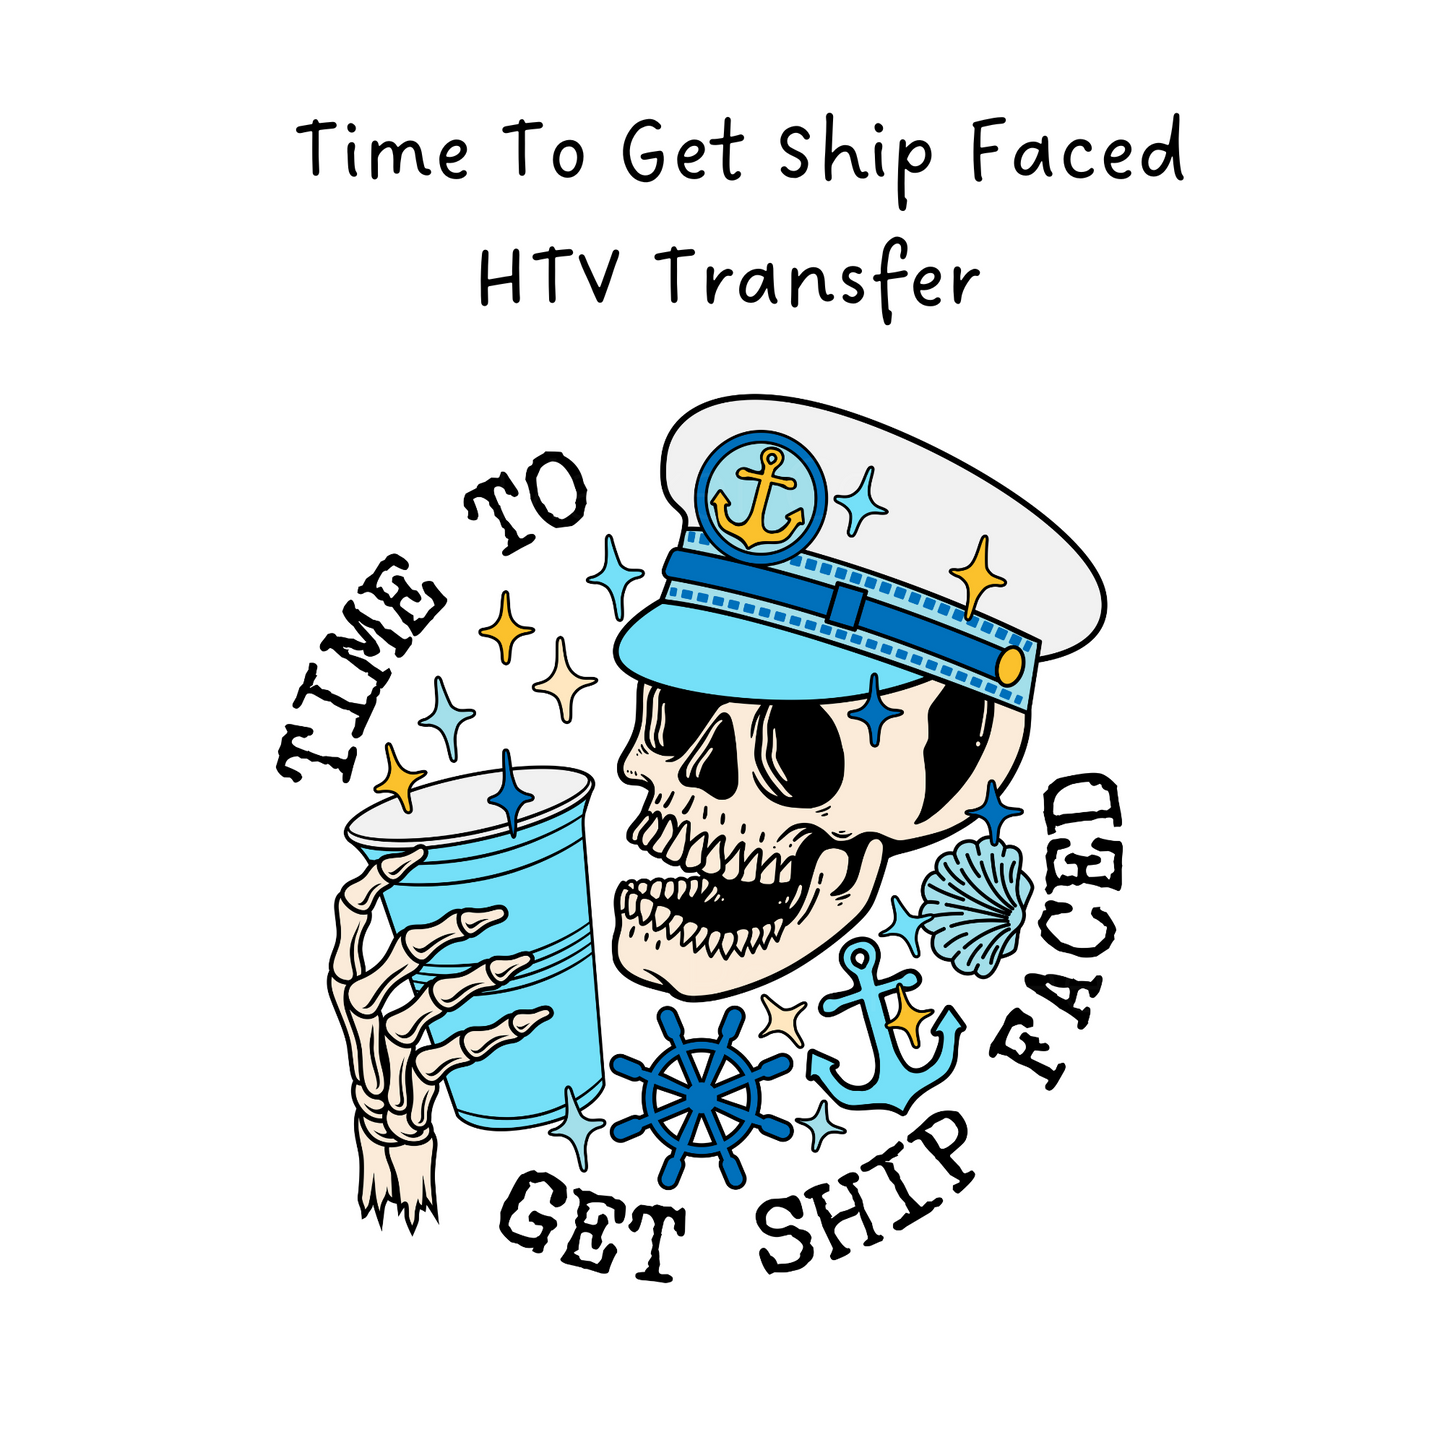 Time To Get Ship Faced HTV Transfer